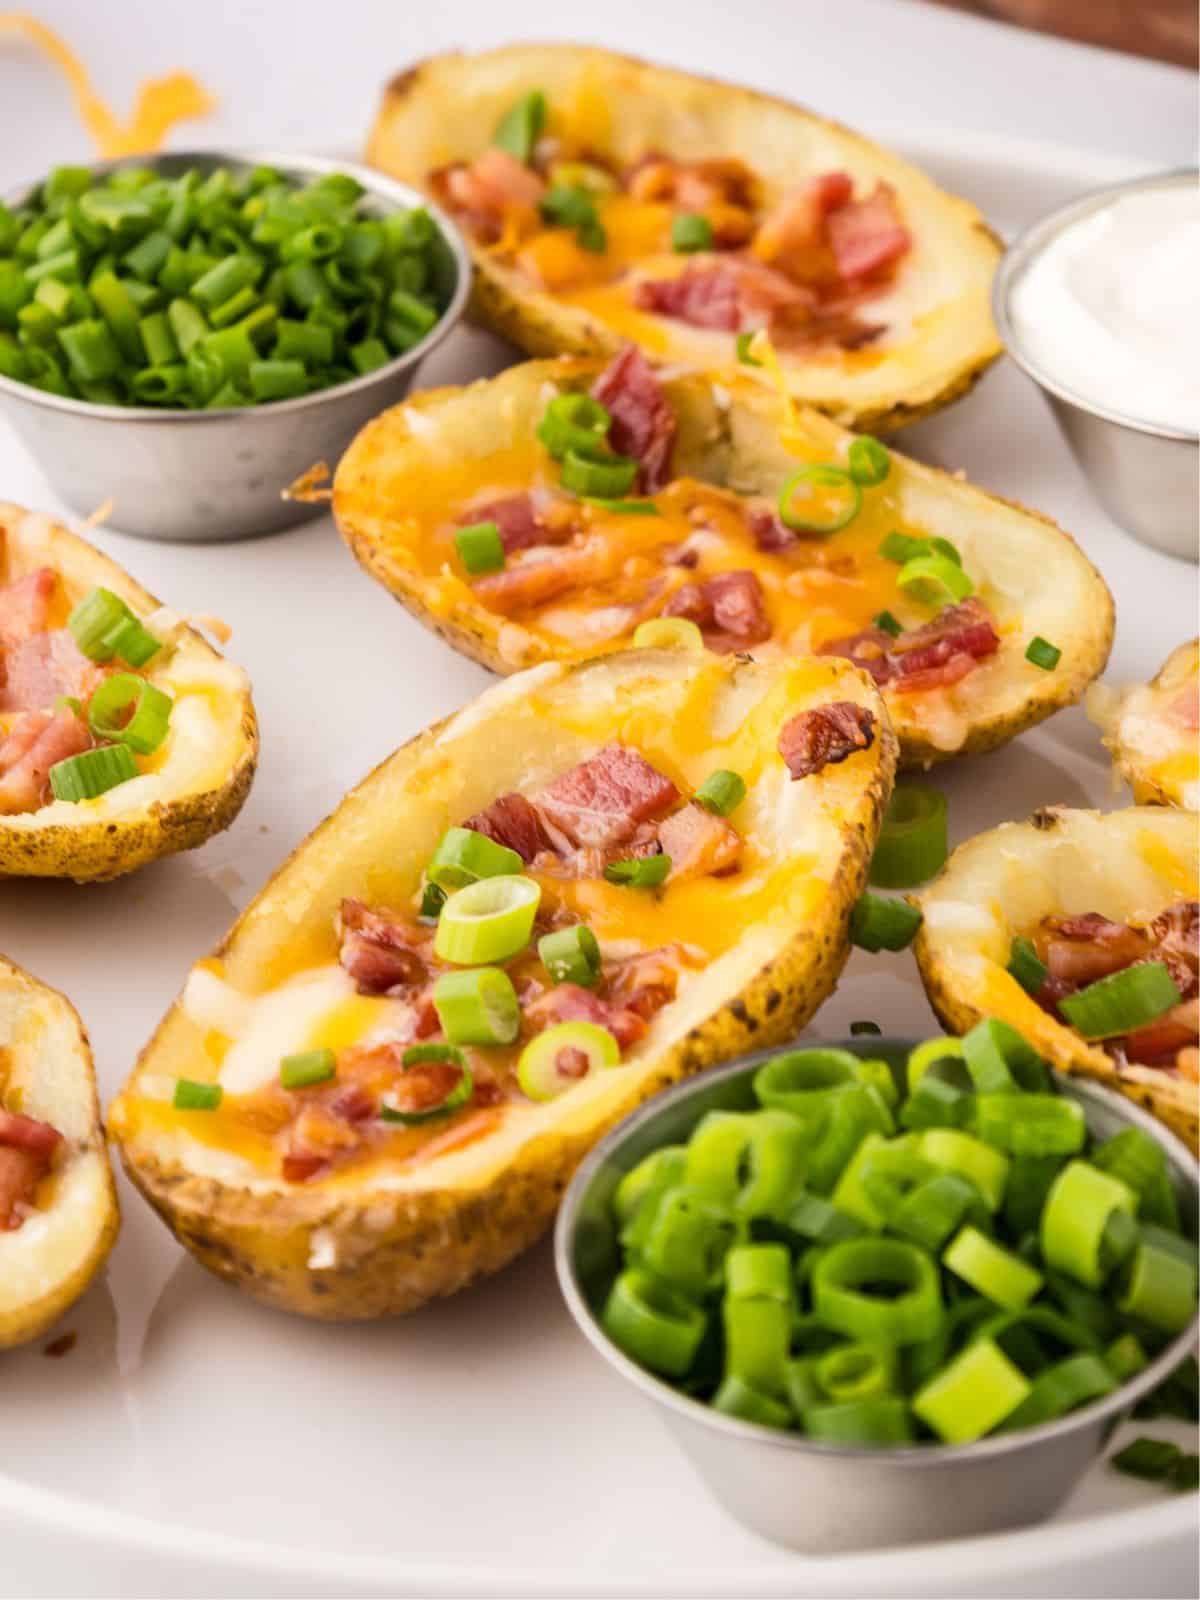 Crispy air fryer potato skins on white serving platter next to small bowls of green onions and sour cream.